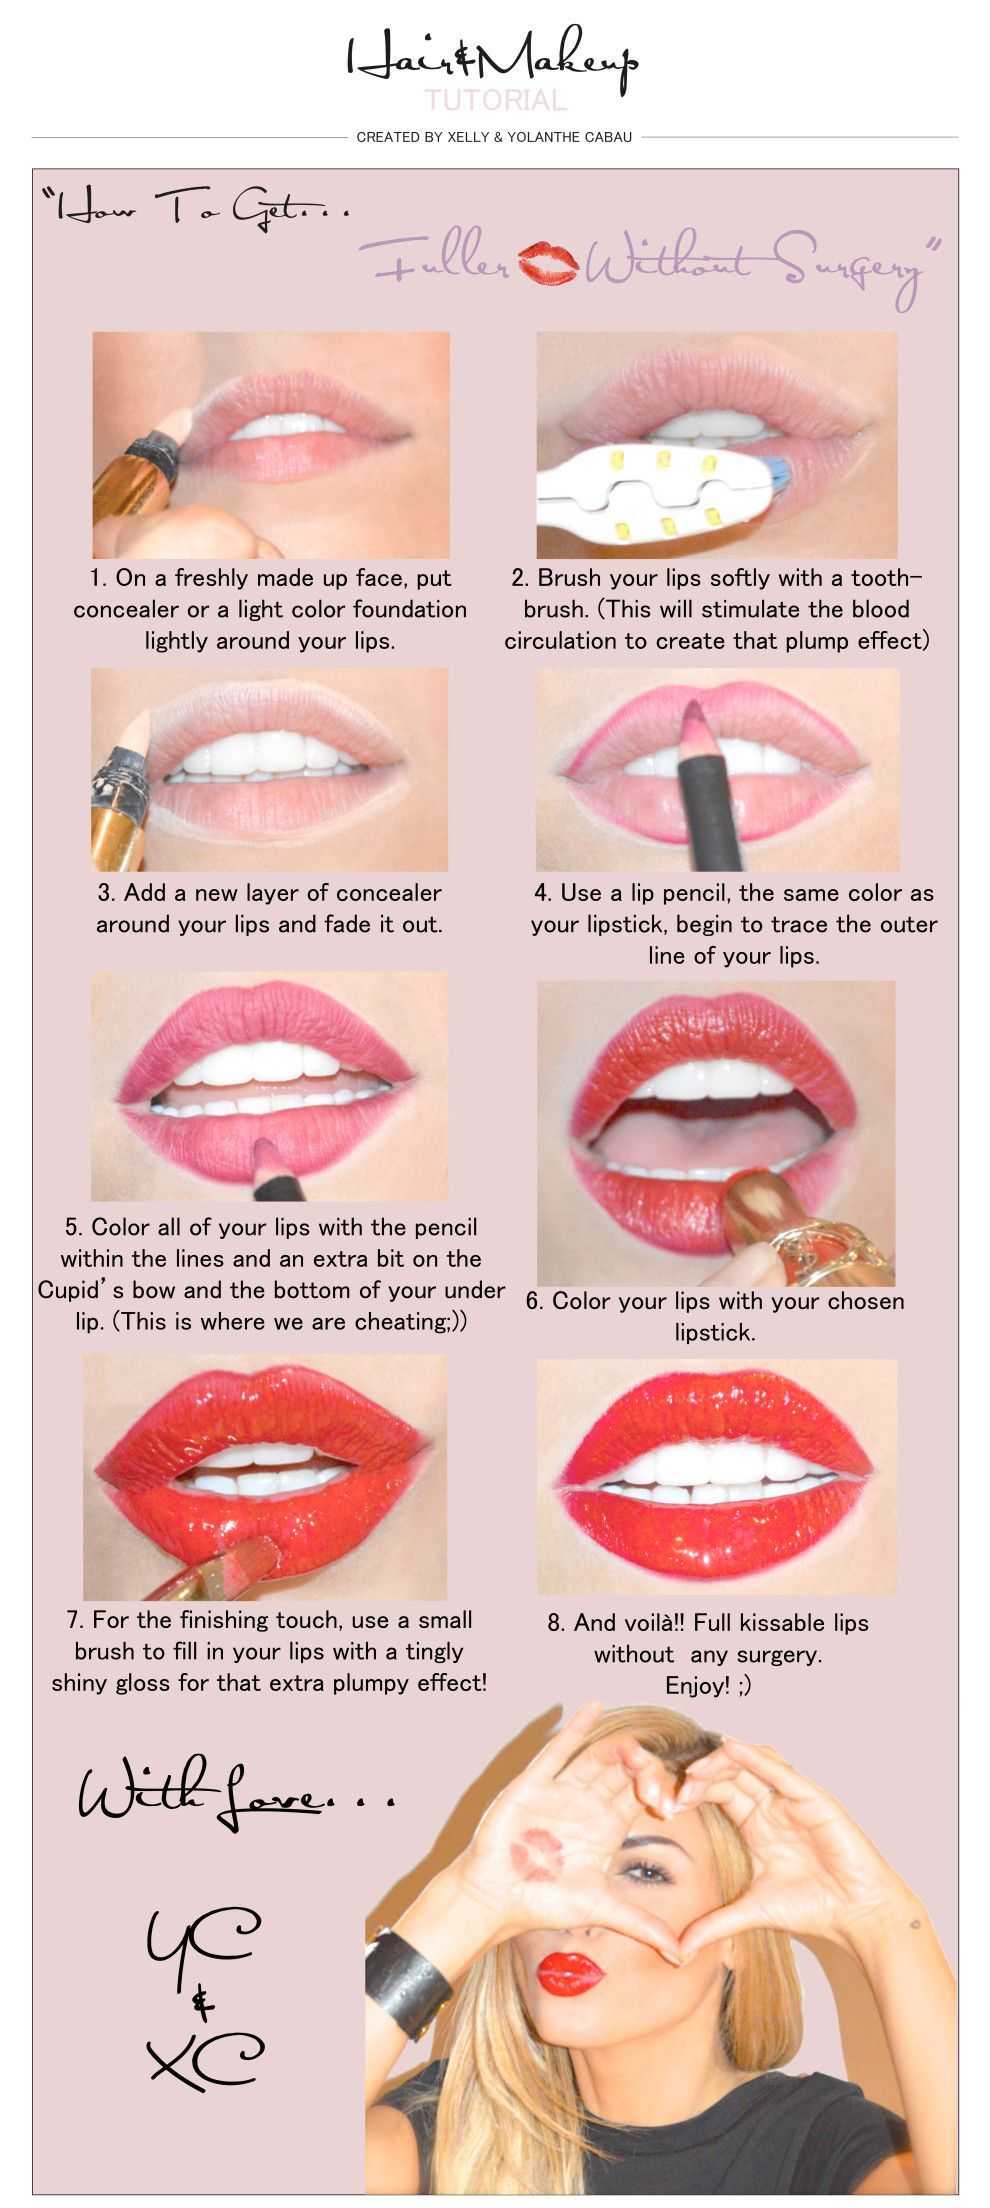 How To Get Fuller Lips Without Surgery